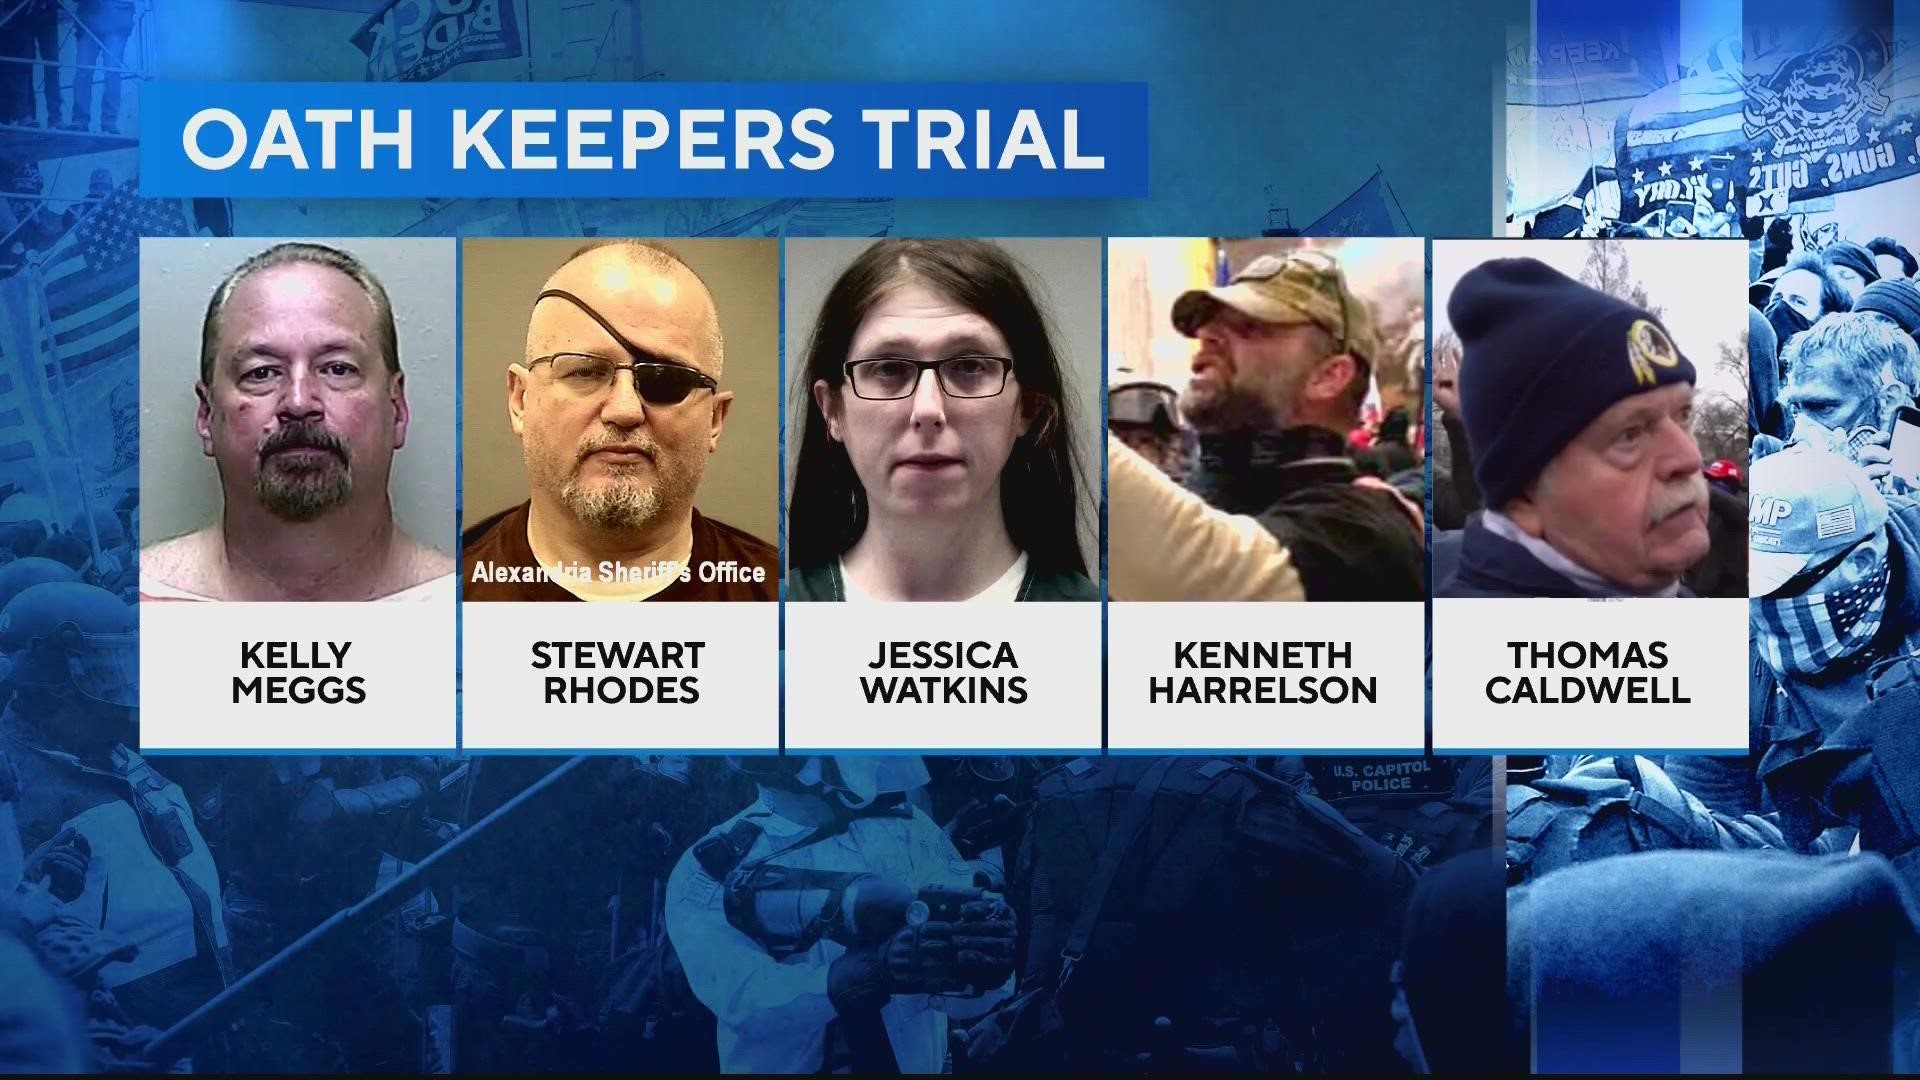 Jurors deliberated for three days before finding Stewart Rhodes and Kelly Meggs, the militia's Florida state leader, guilty of the most serious charge against them.